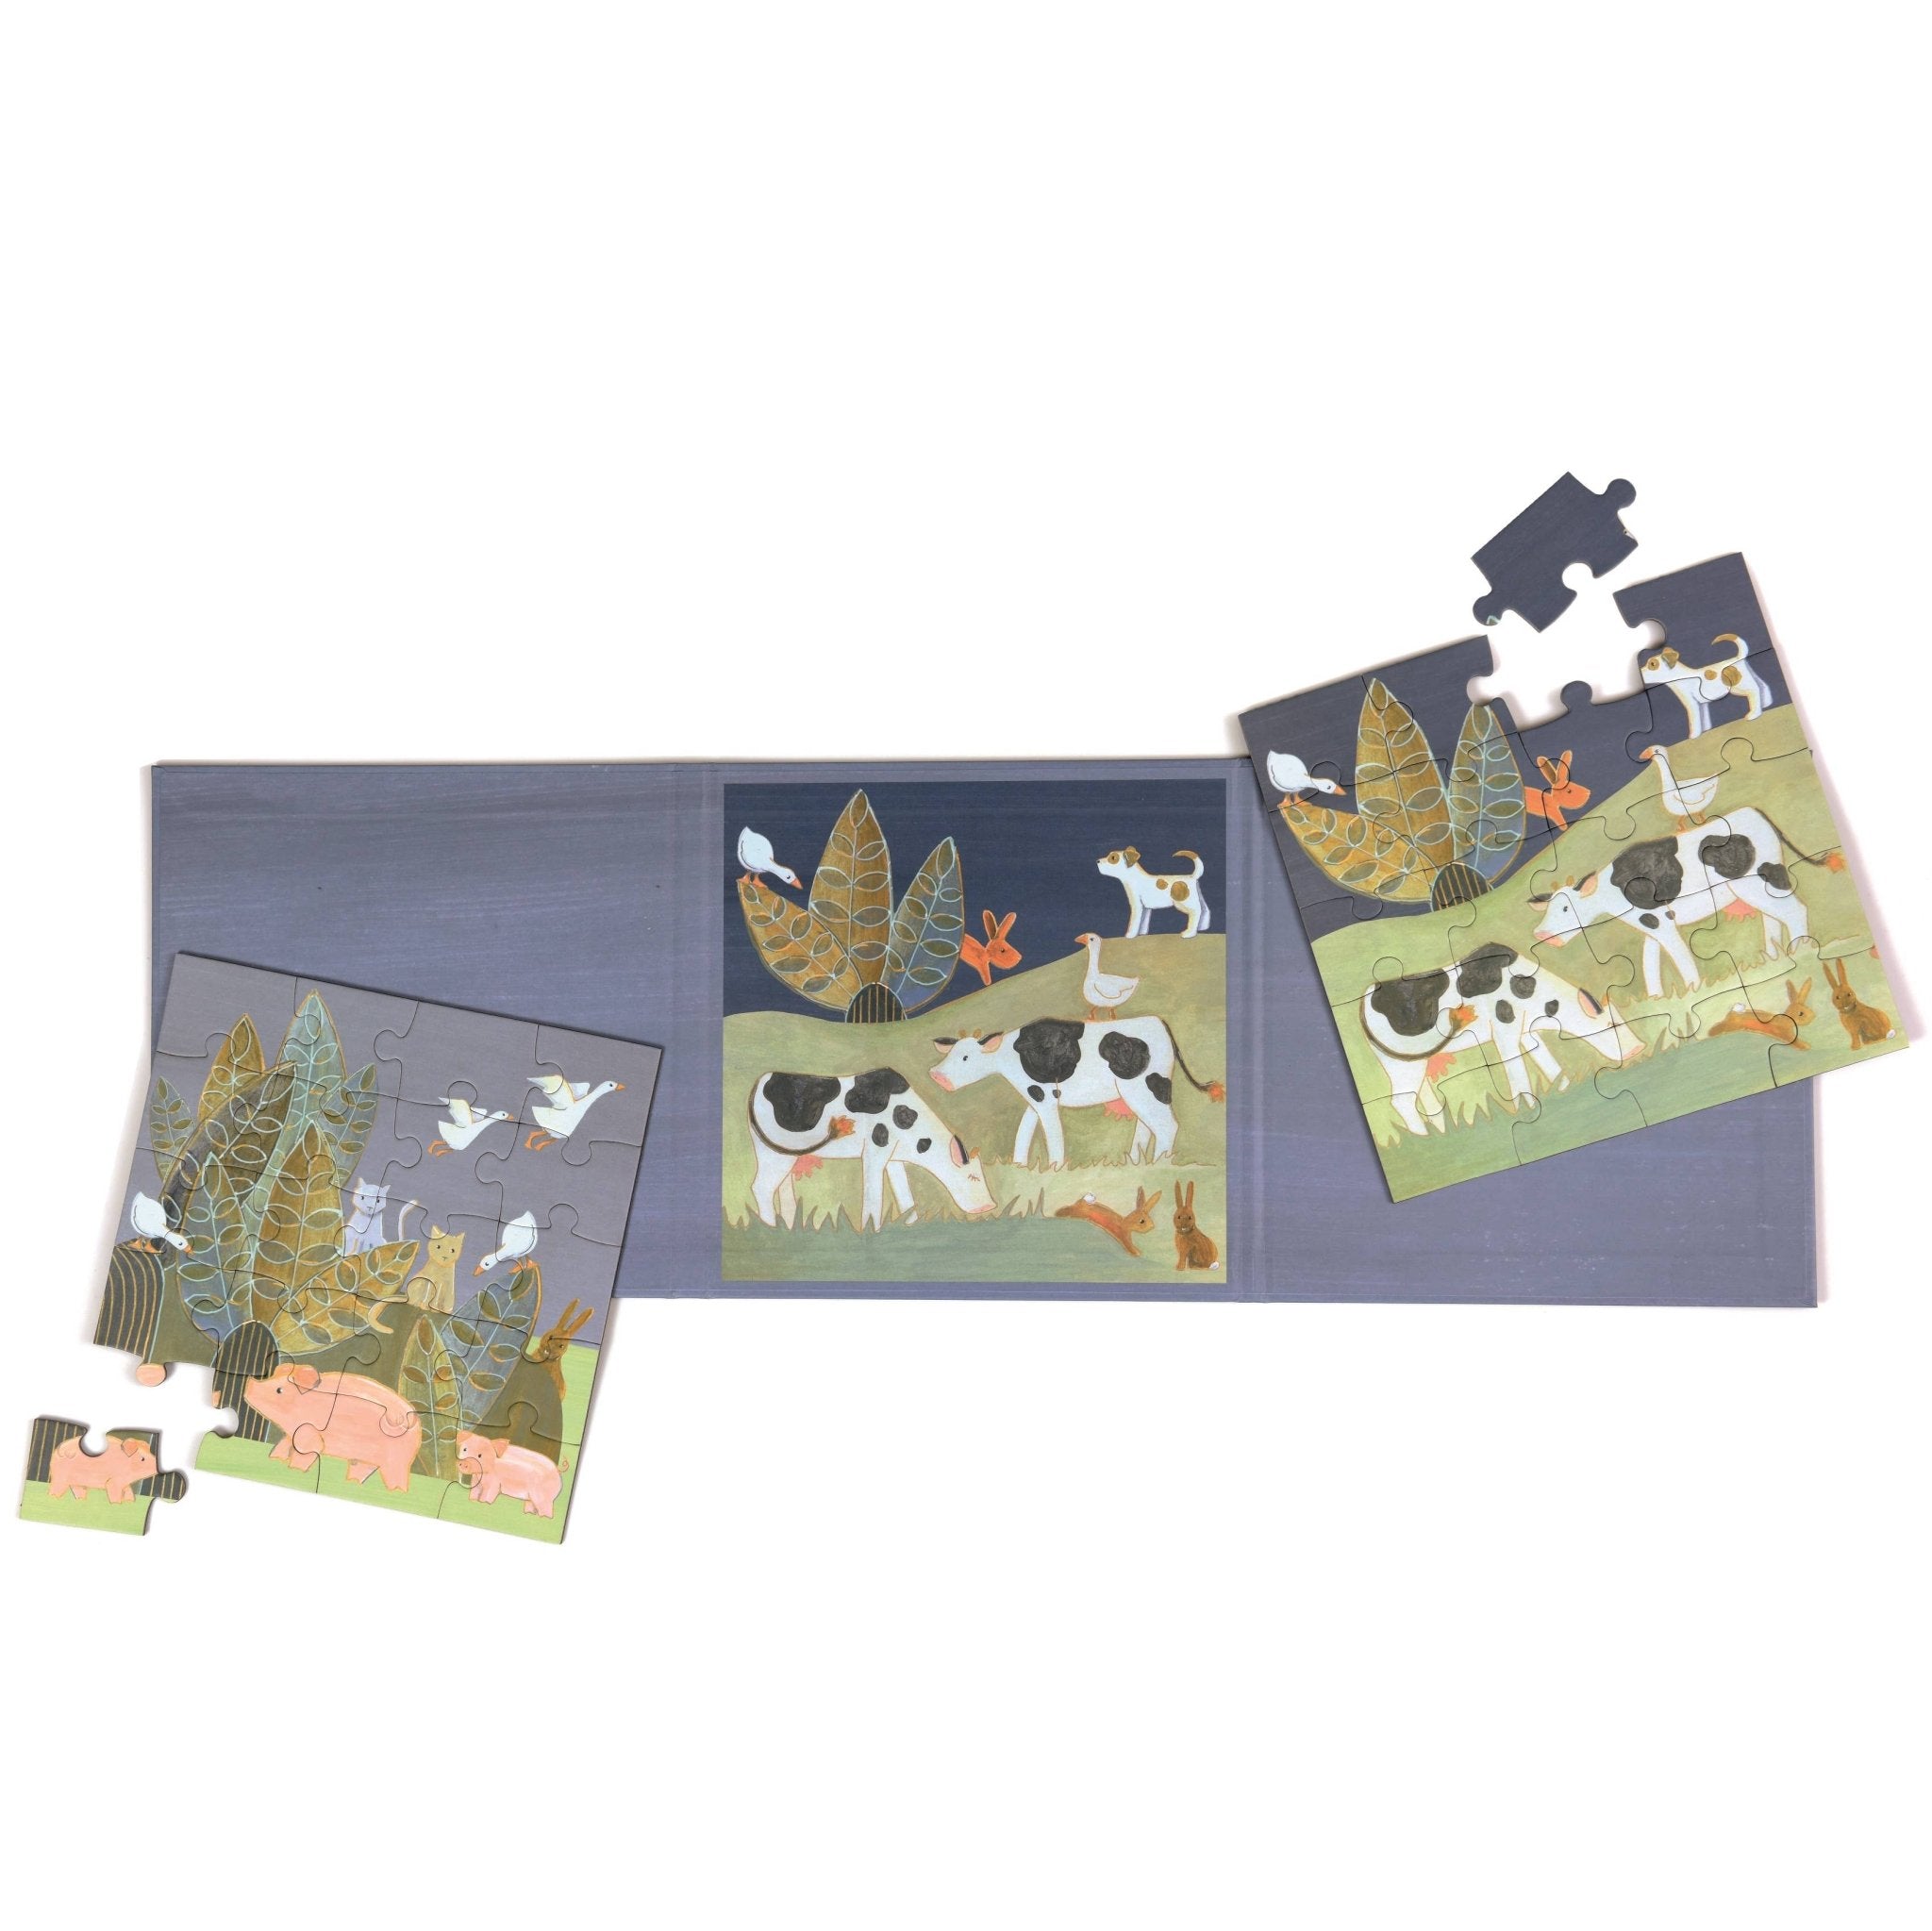 Magnetic Puzzle - Countryside - TAYLOR + MAXEgmont